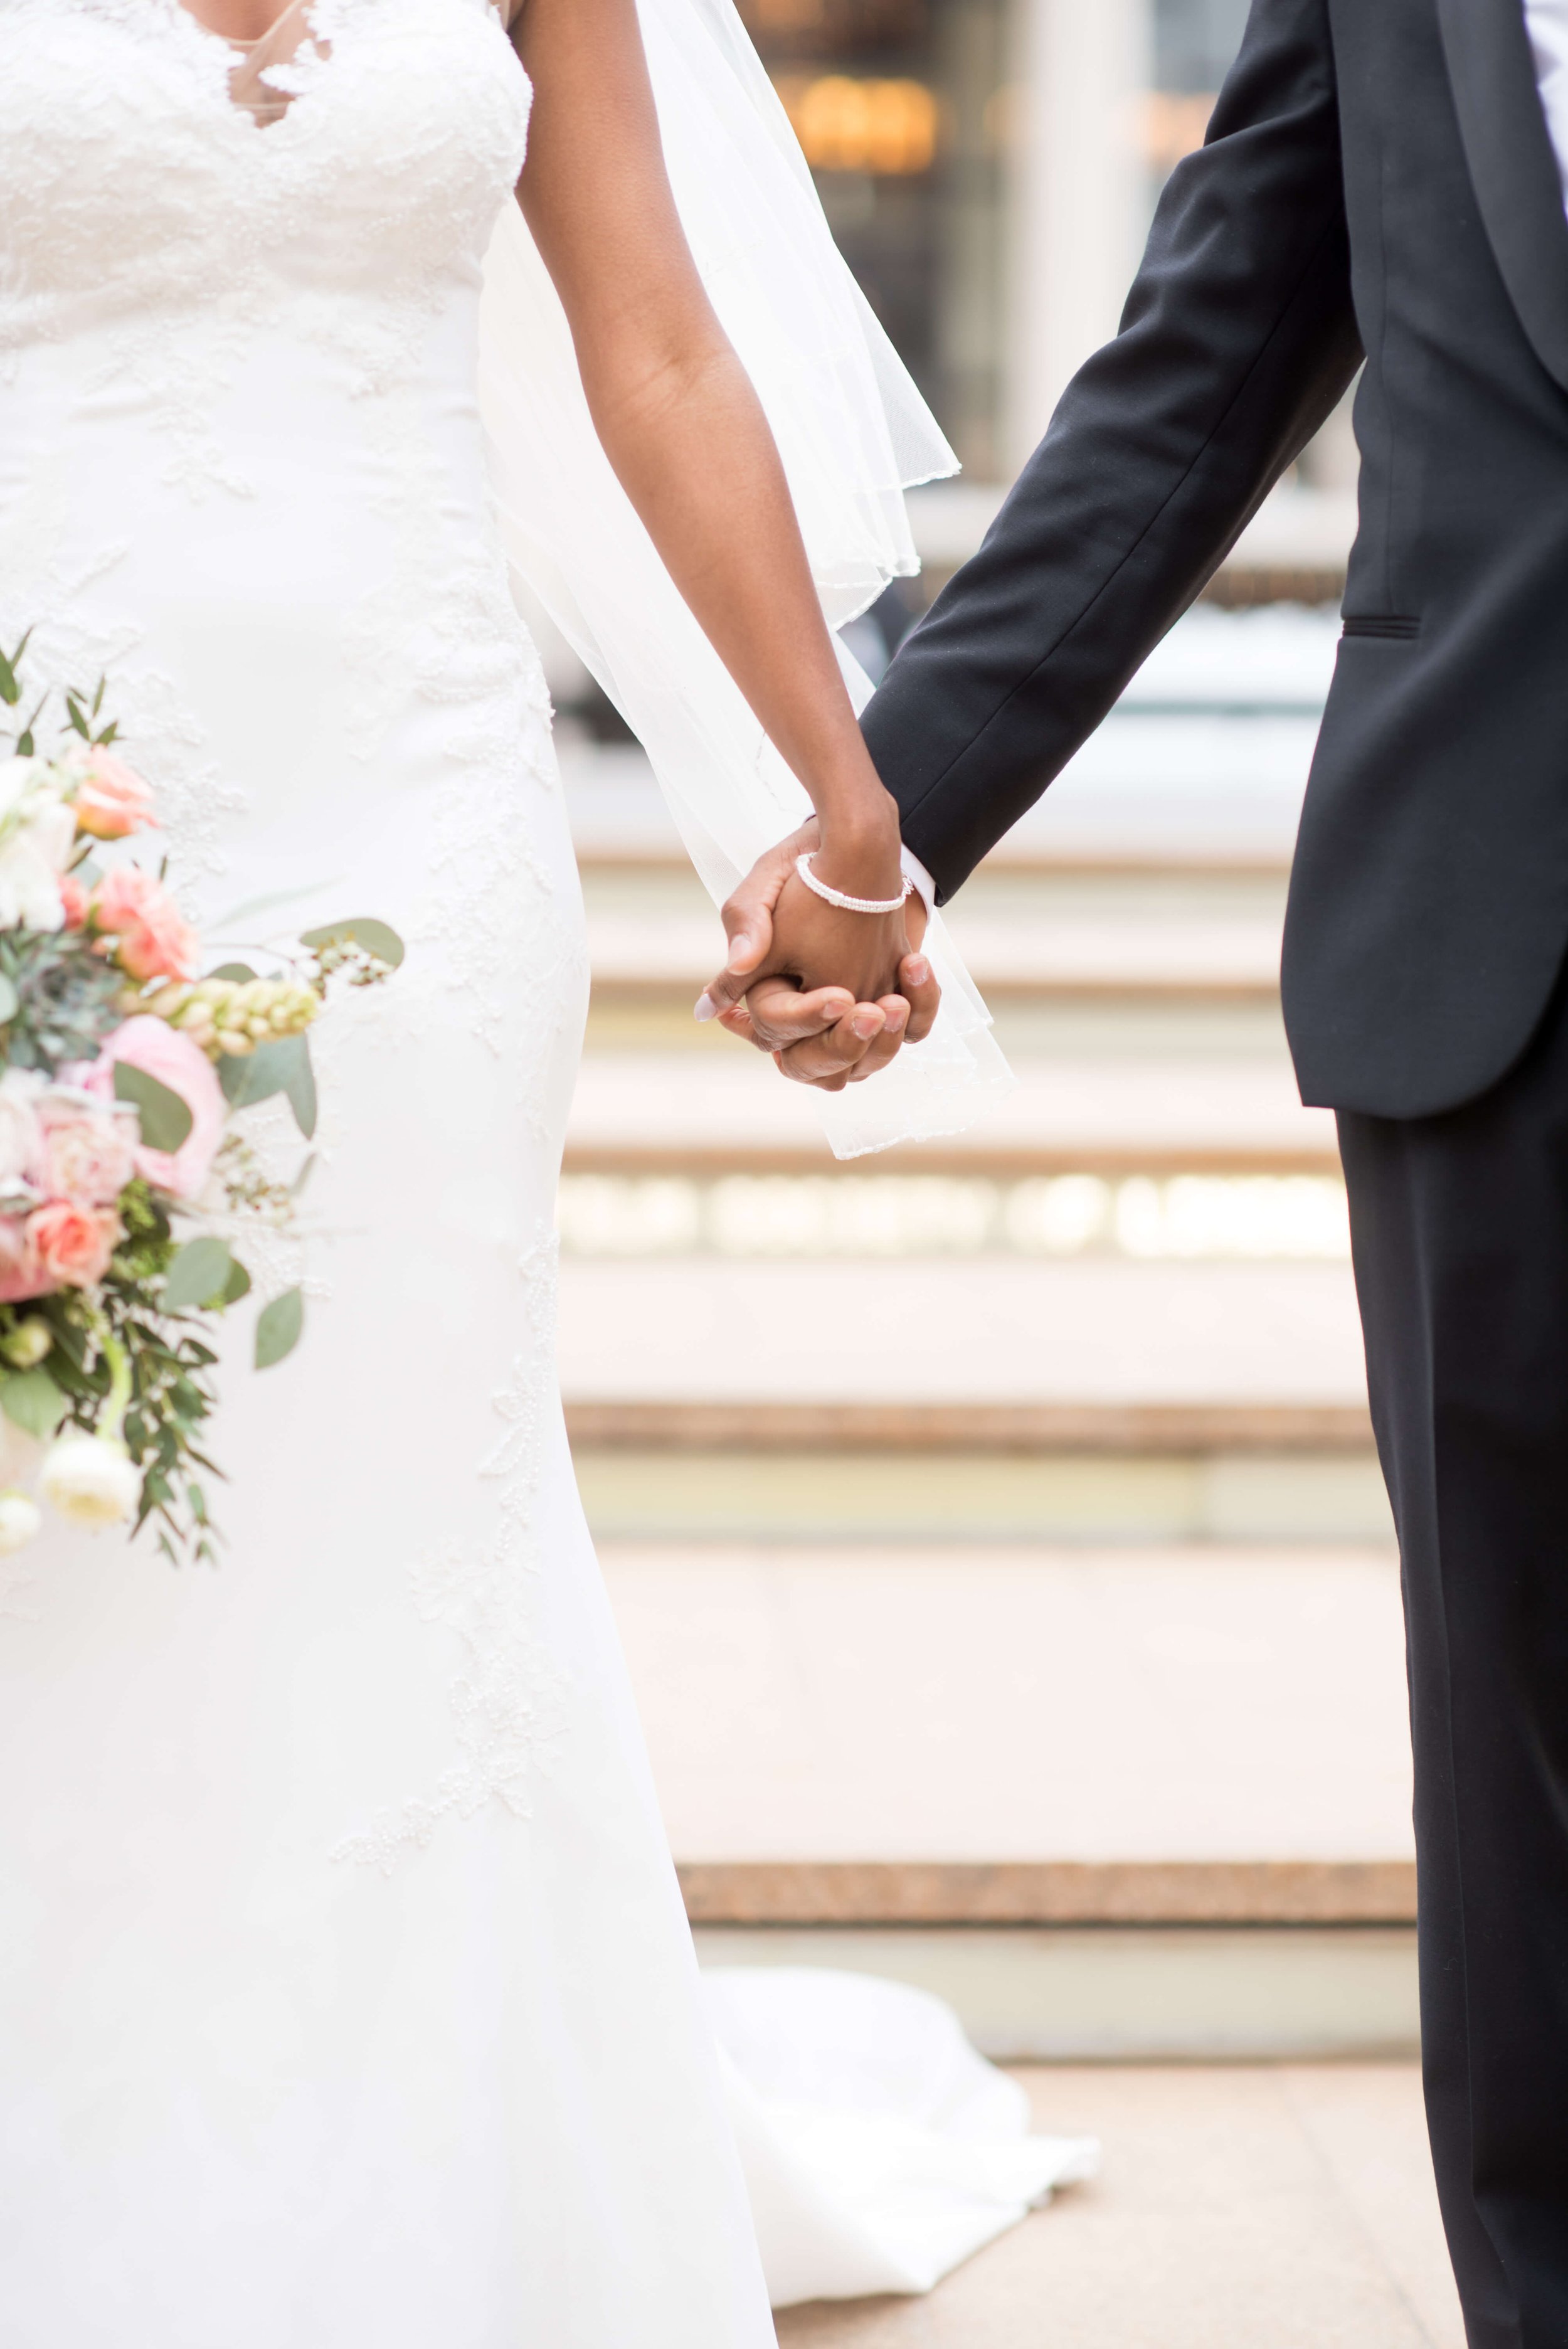 Bride and groom holding hands, showcasing their wedding attire and unity in a candid, heartfelt moment.